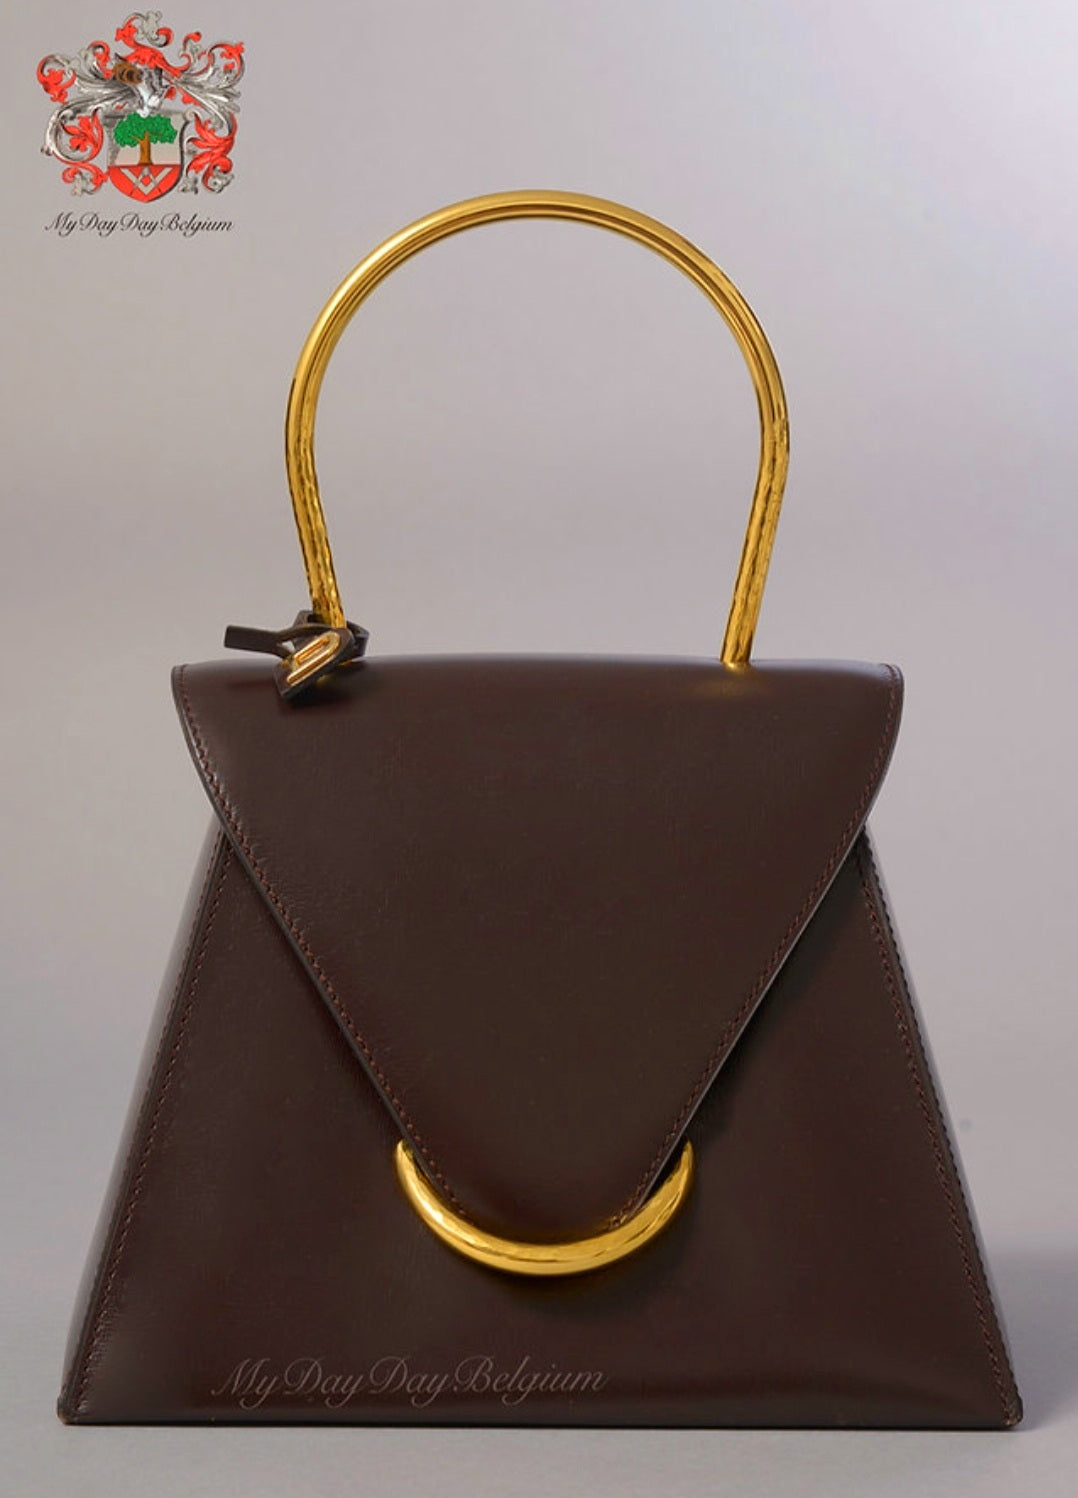 Vintage top handle bag with padlock, 1990s in mustard leather